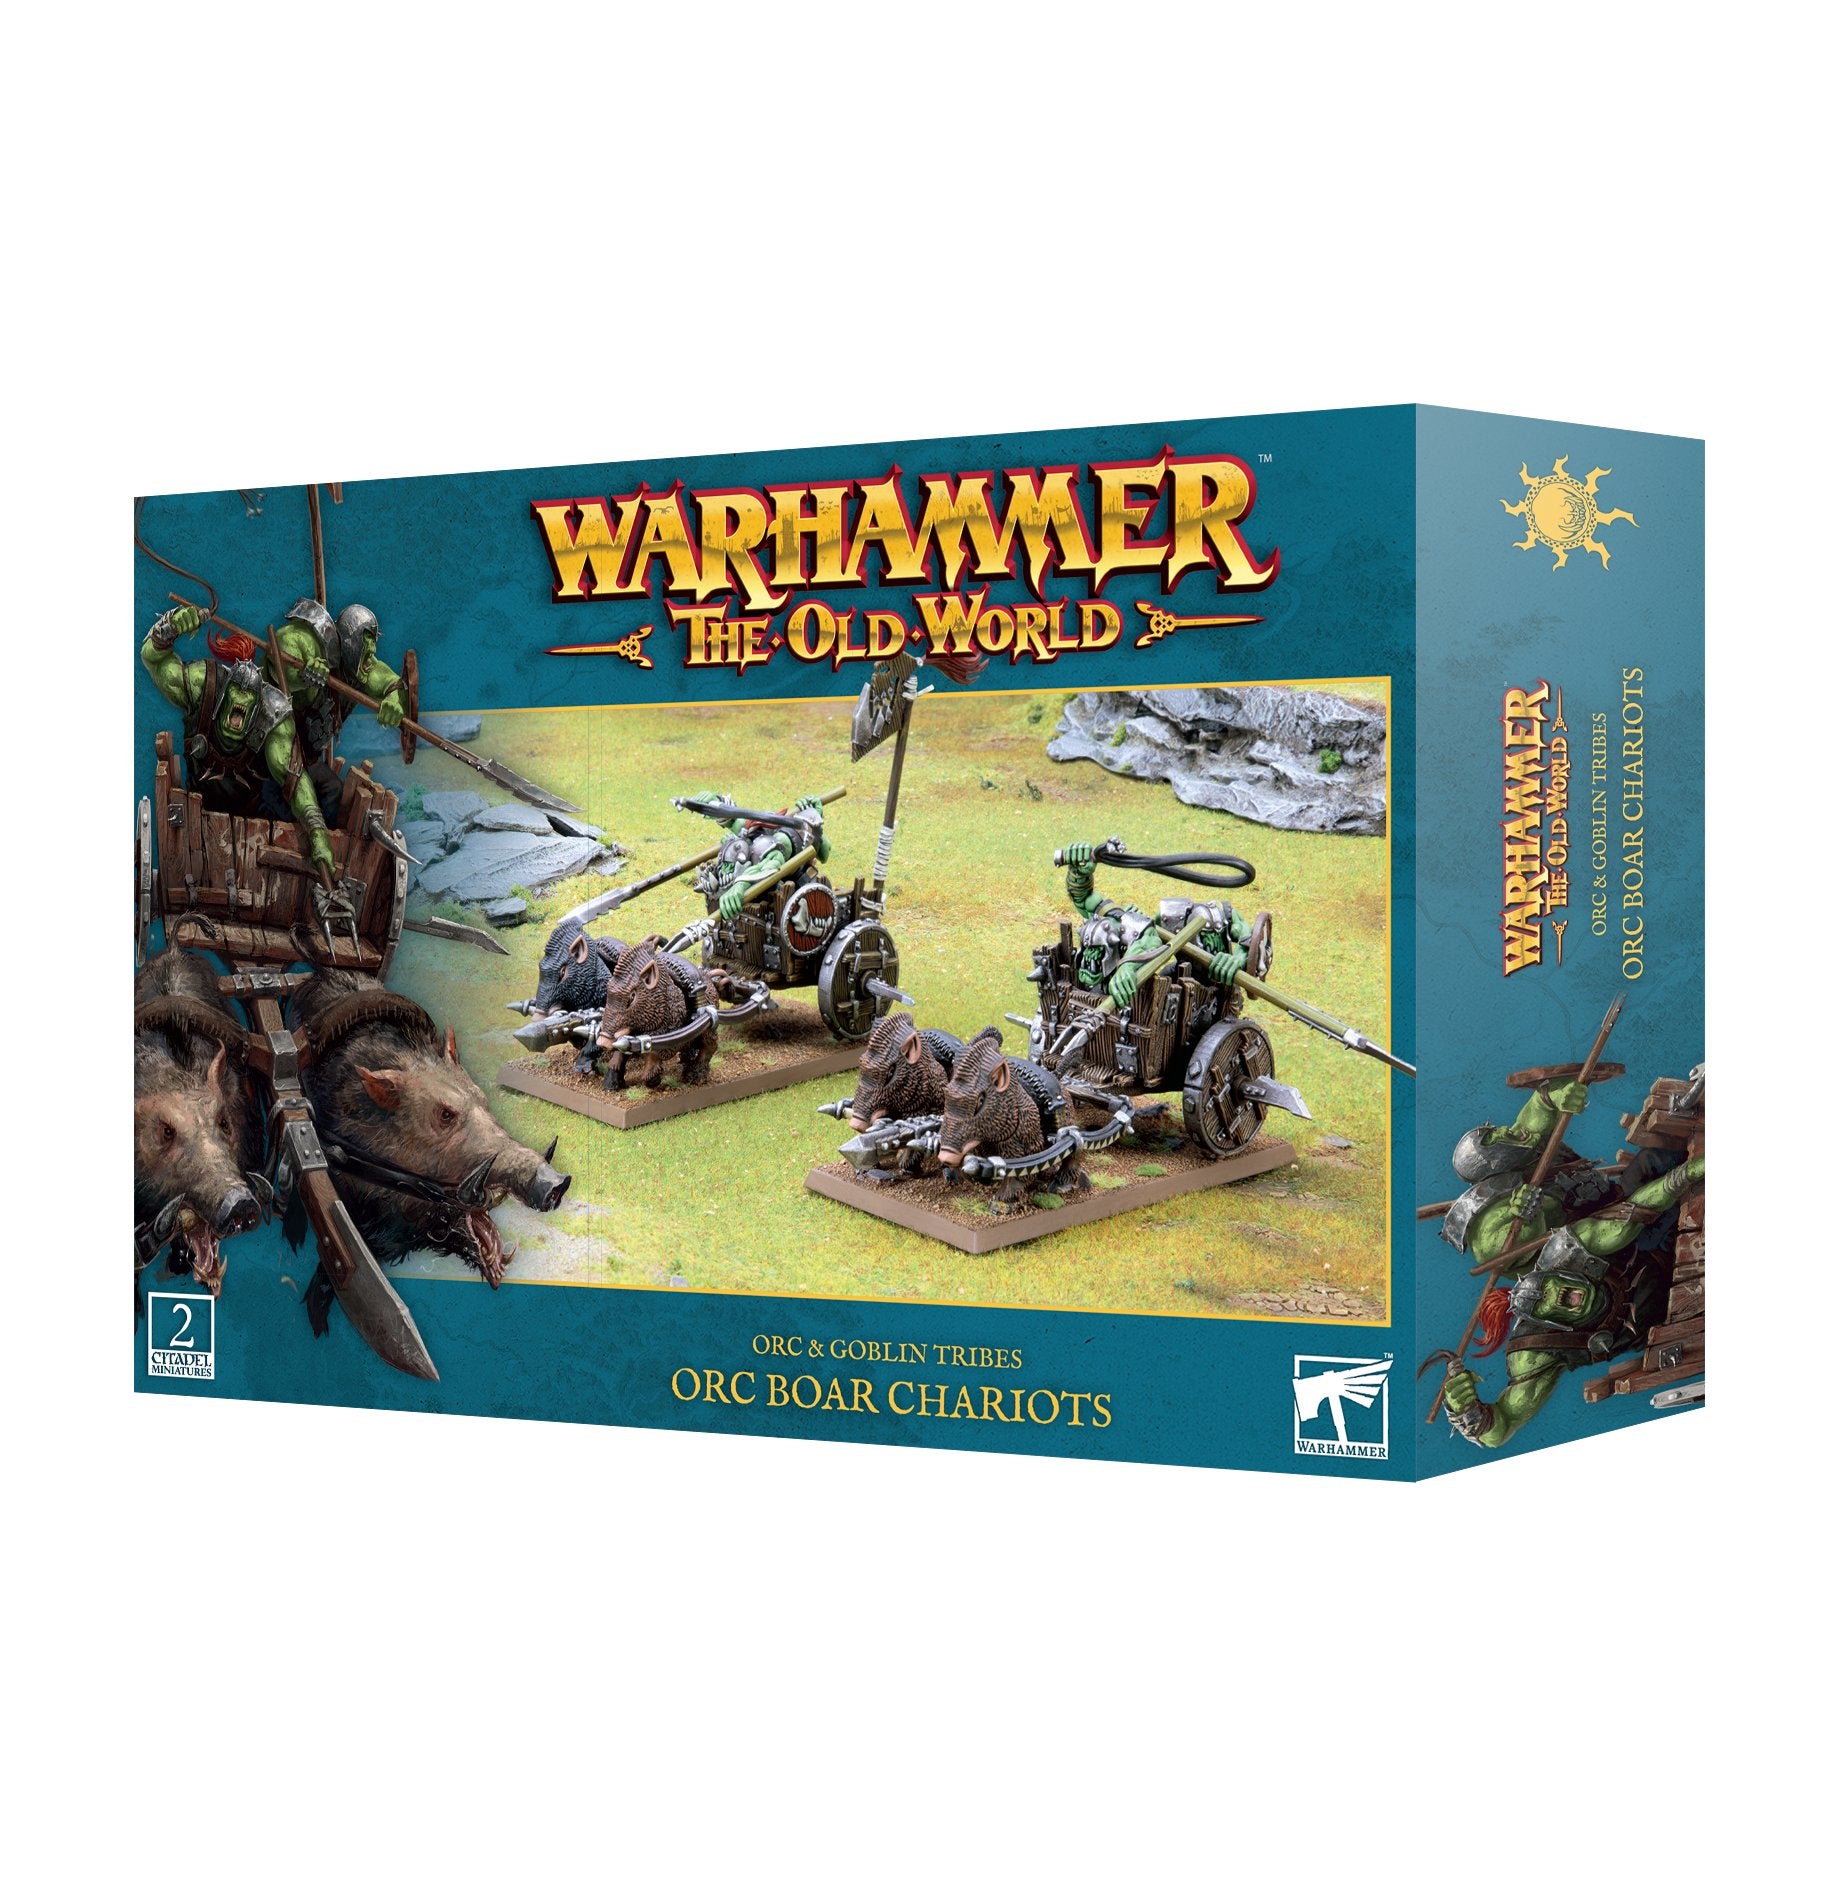 Orc & Goblin Tribes: Orc Boar Chariots - Release Date 4/5/24 - Loaded Dice